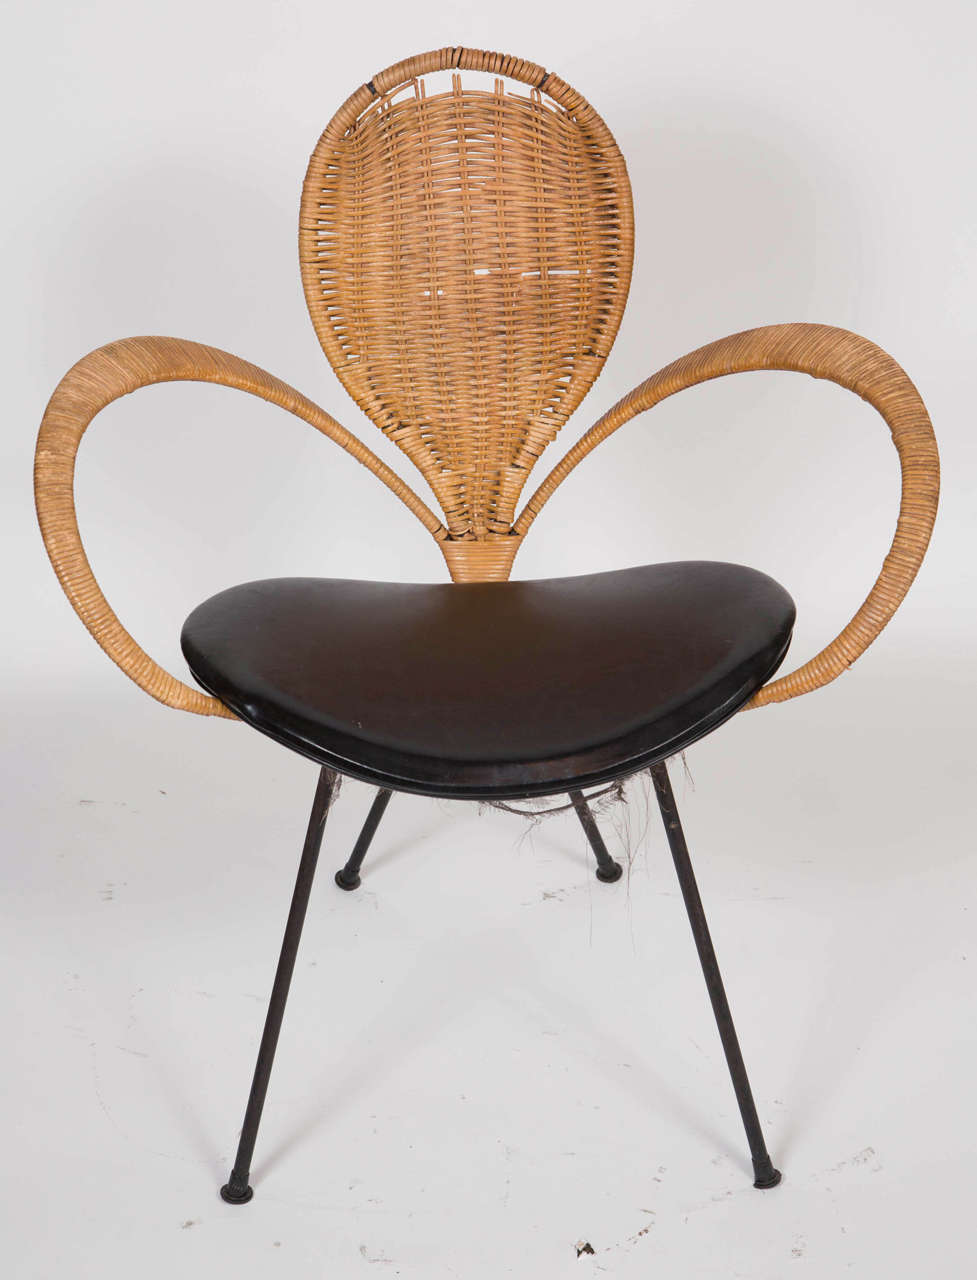 This is a black four legged metal chair with large over exaggerated wicker arms and a teardrop shaped wicker back. The seat is a black vinyl round edge cushion base. This can be seen at our 1800 South Grand Ave location in downtown LA.